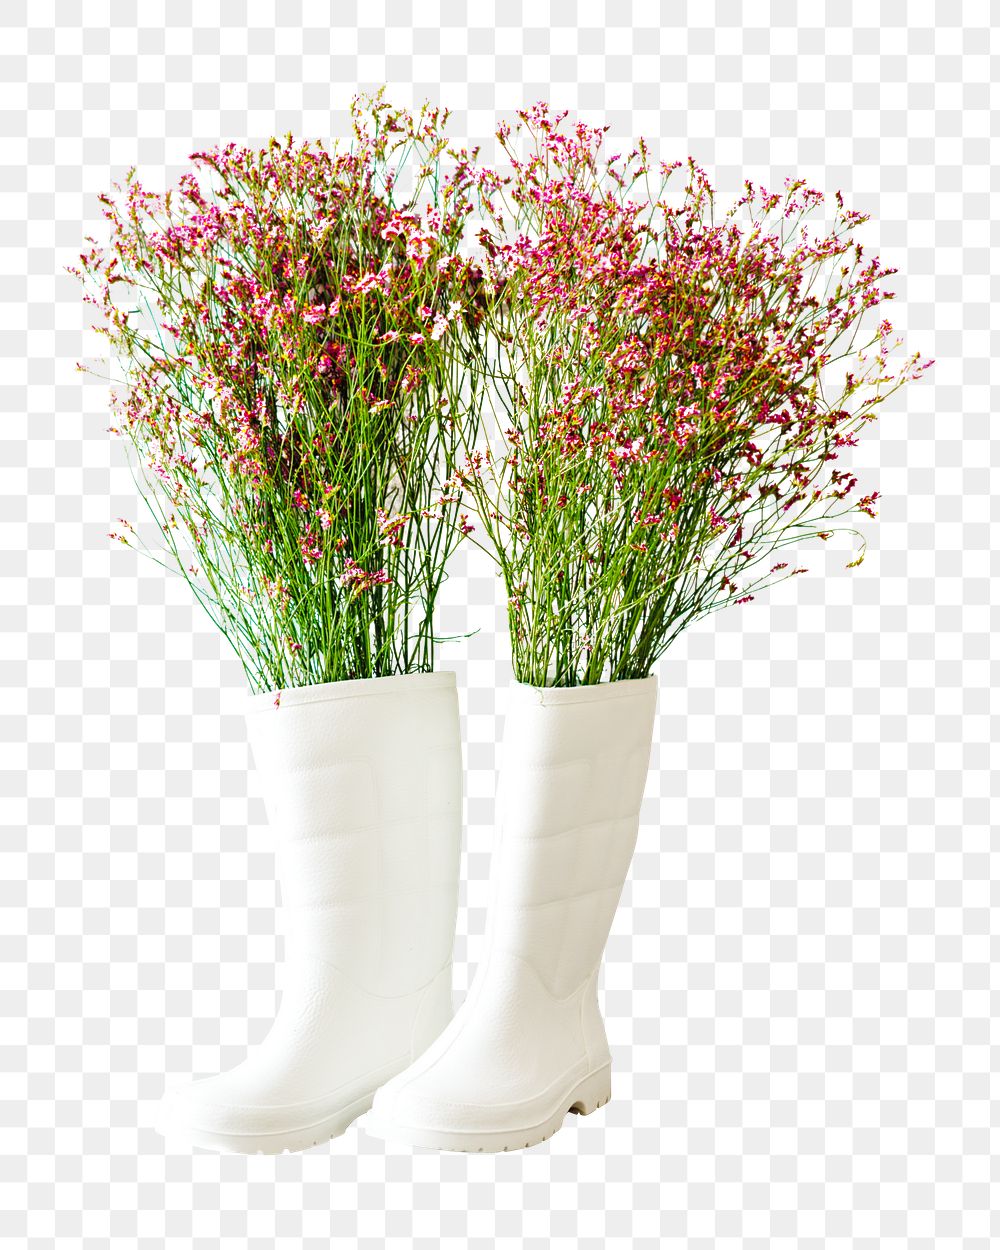 Gardening boot png with flower elements, transparent background